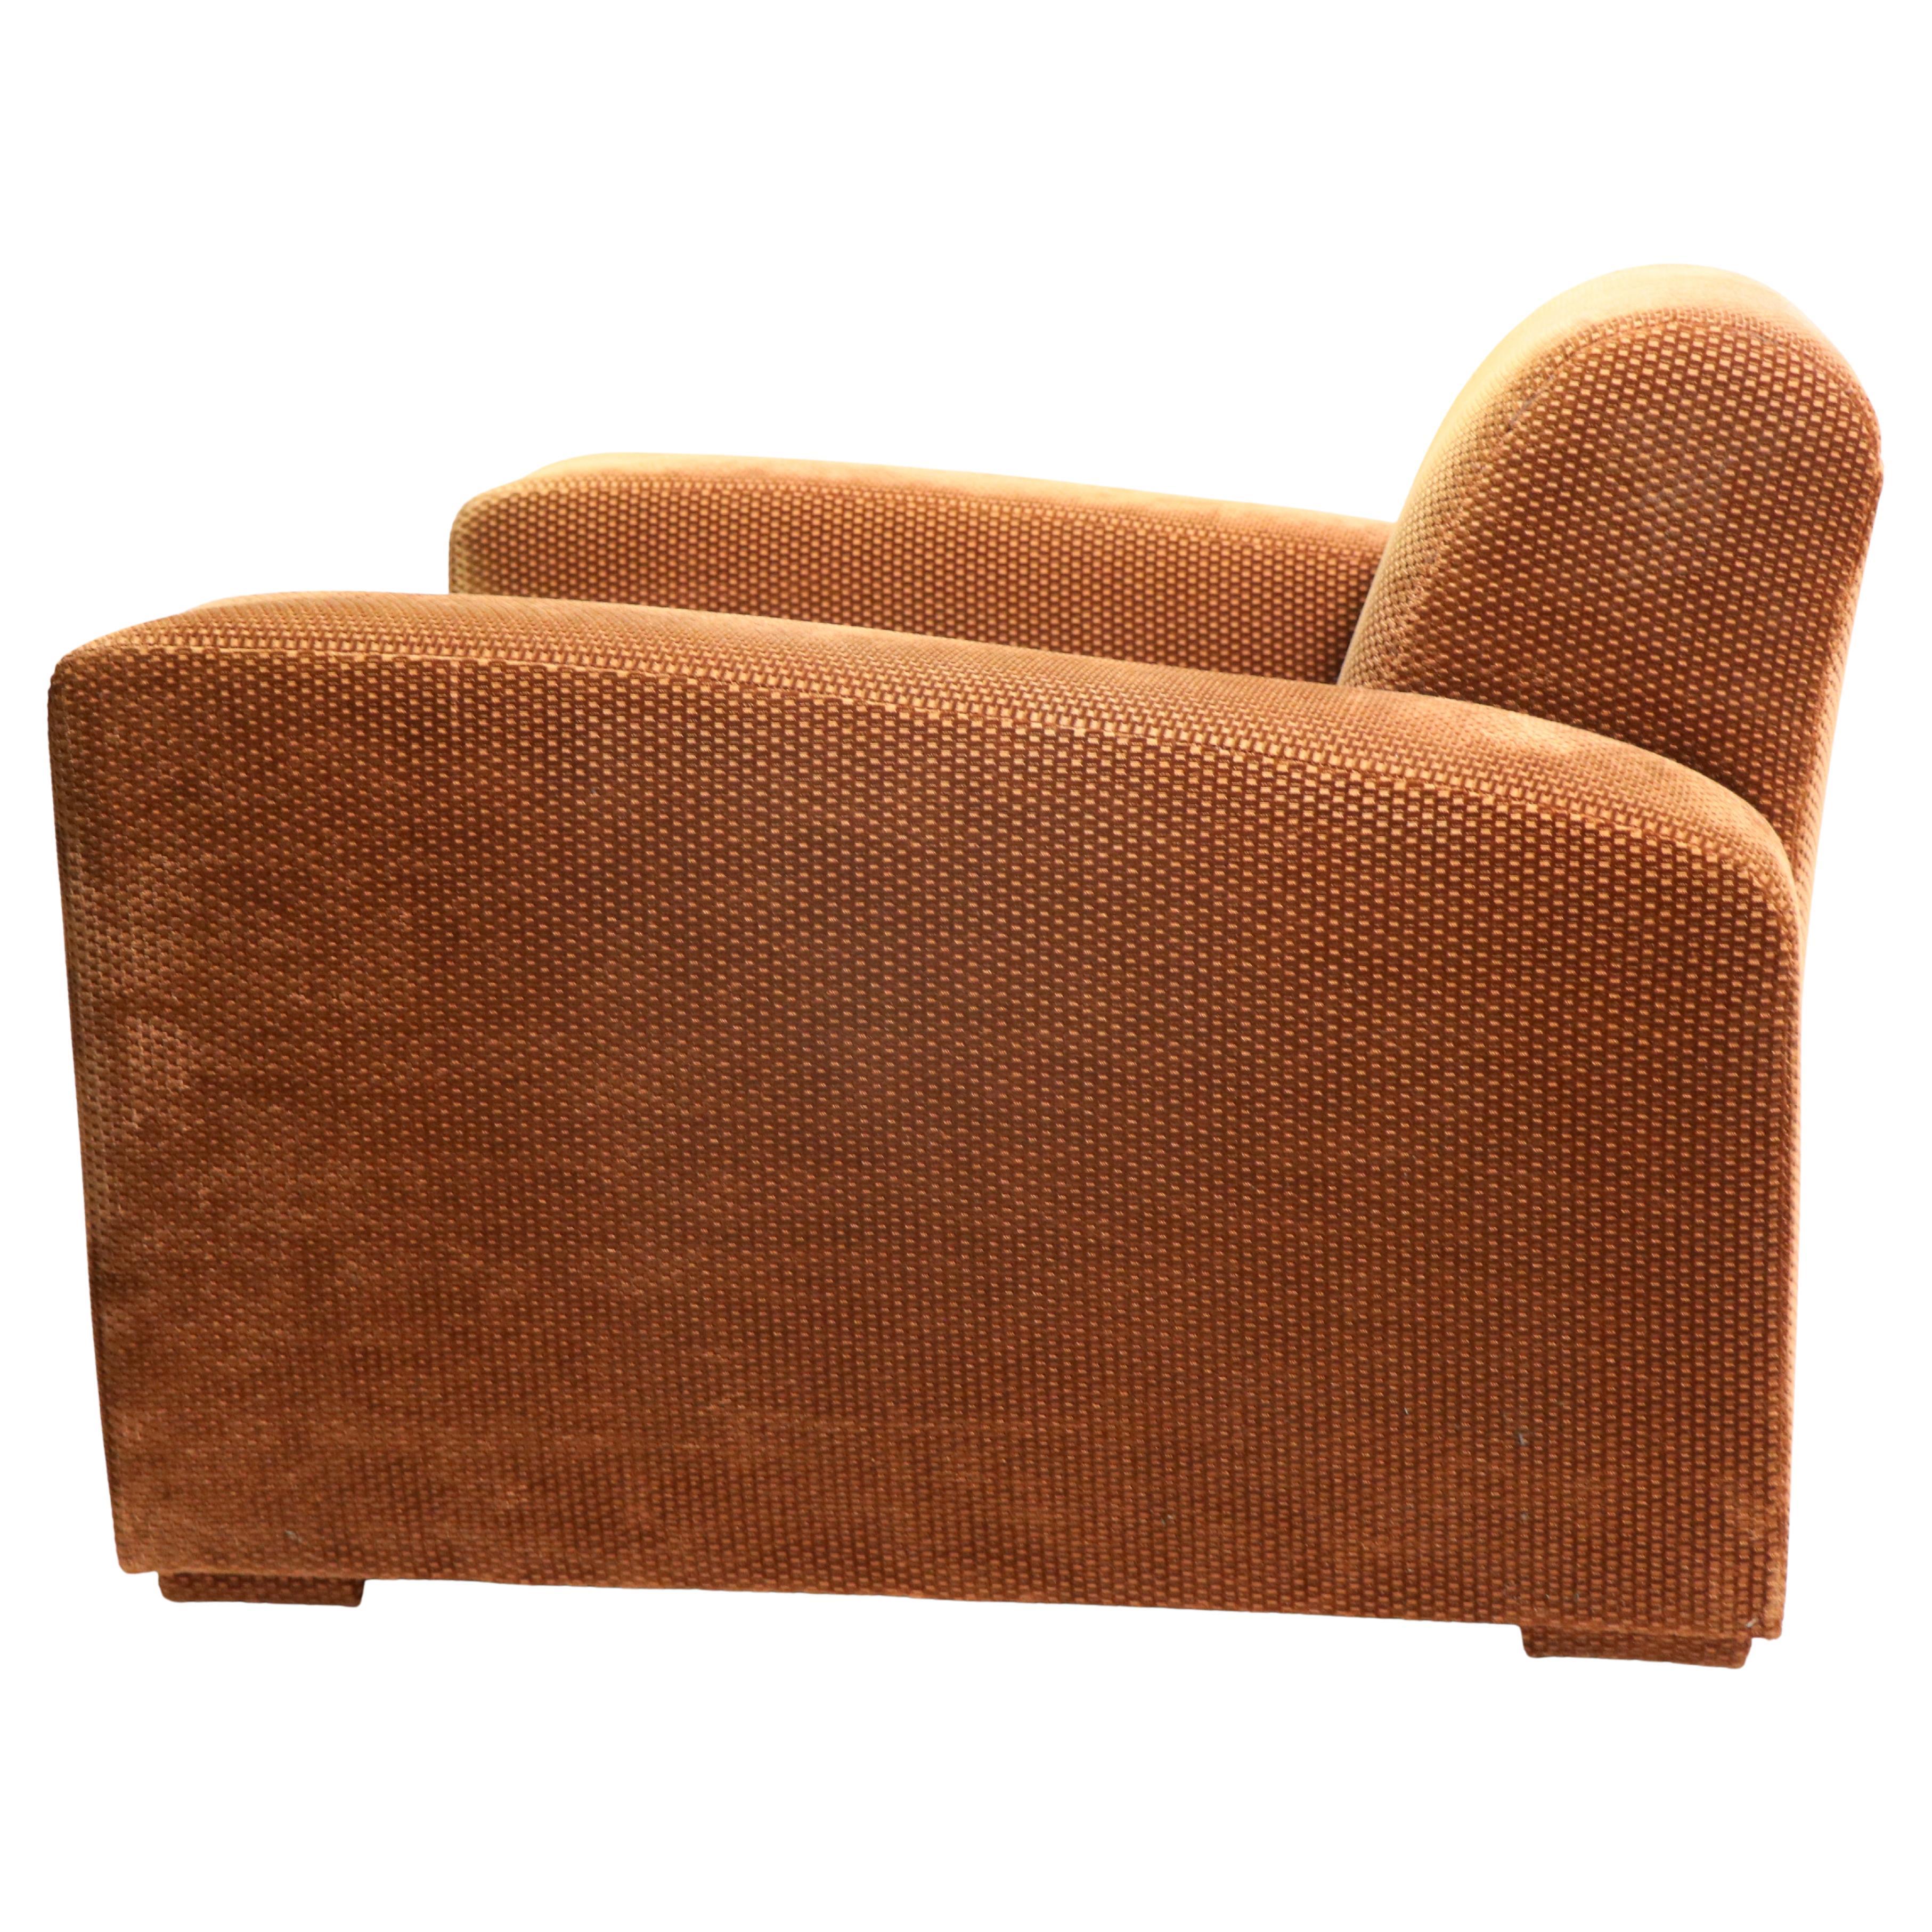 High style Art Moderne club, lounge chair in the style of the iconic Speed chair designed by Paul Frankl. This example is in very clean ready to use condition, it is voguish, chic, and comfortable. The exaggerated Art Deco lines still look modern